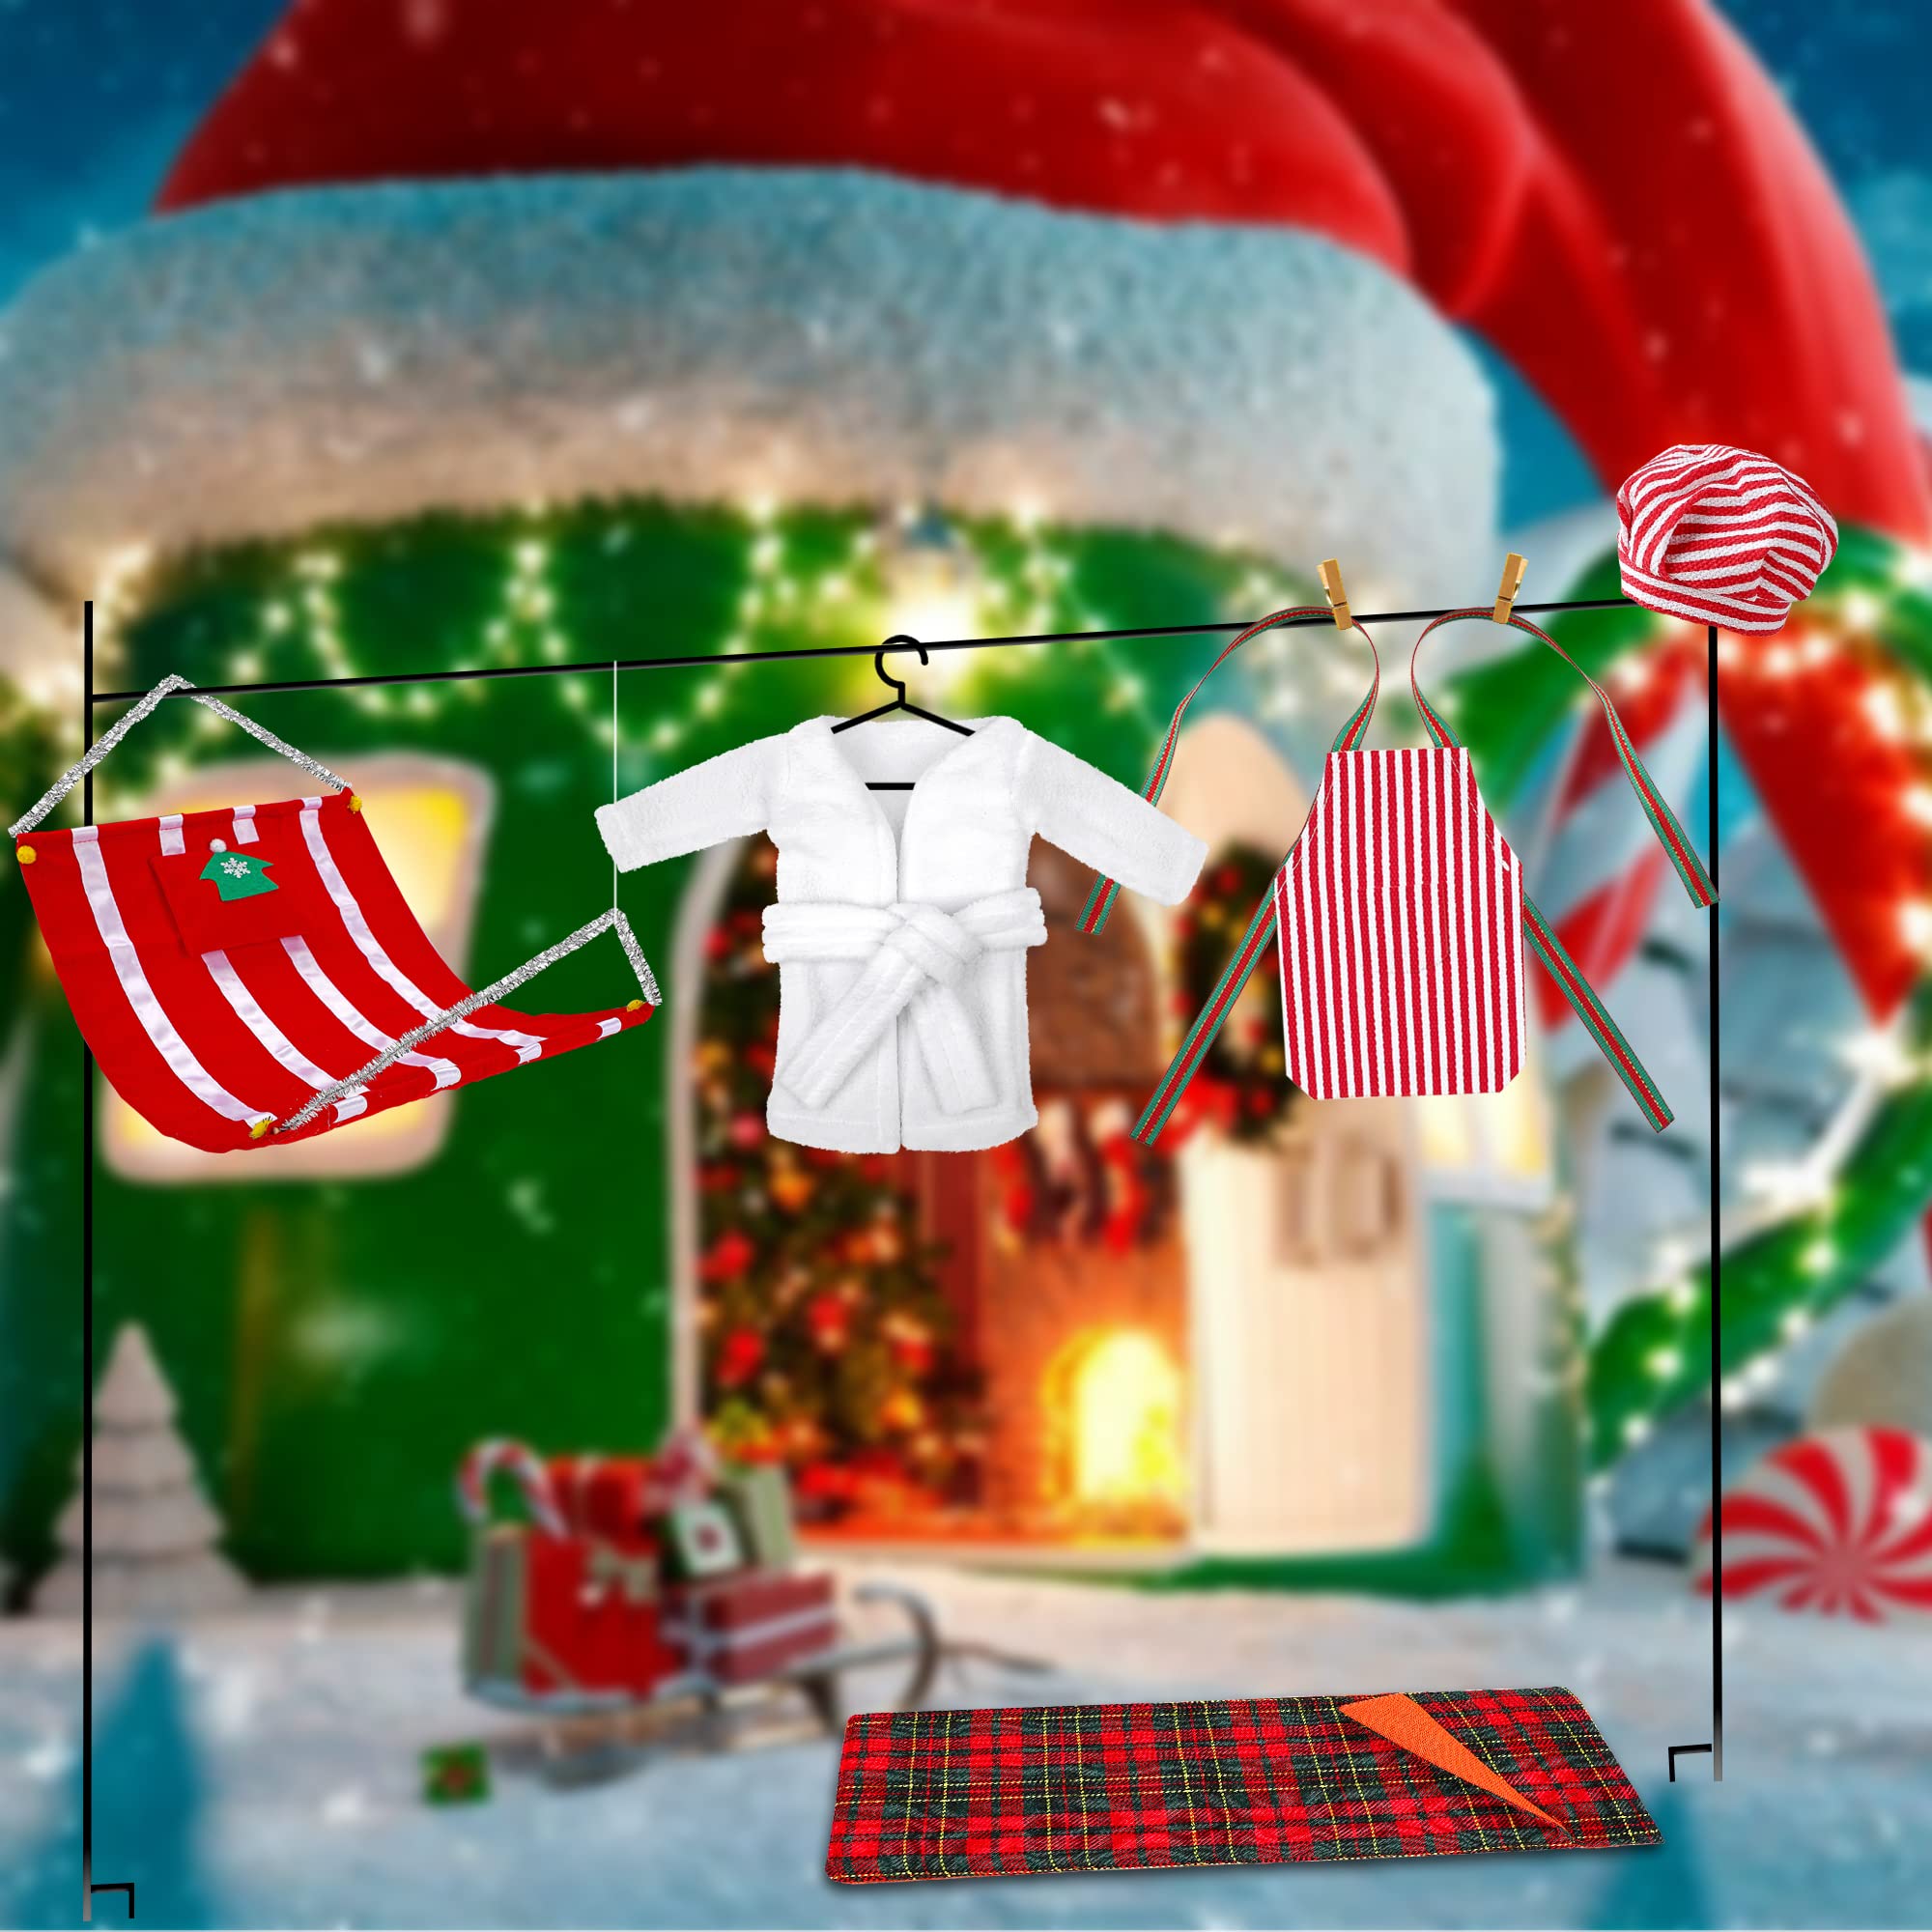 Erweicet Christmas Elf Doll Accessories Couture Accessories Set 5PCS Christmas Doll Clothing Costume Accessories for Elf Doll Including Bathrobe, Sleeping Bag, Hammock, Apron and Chef Hat